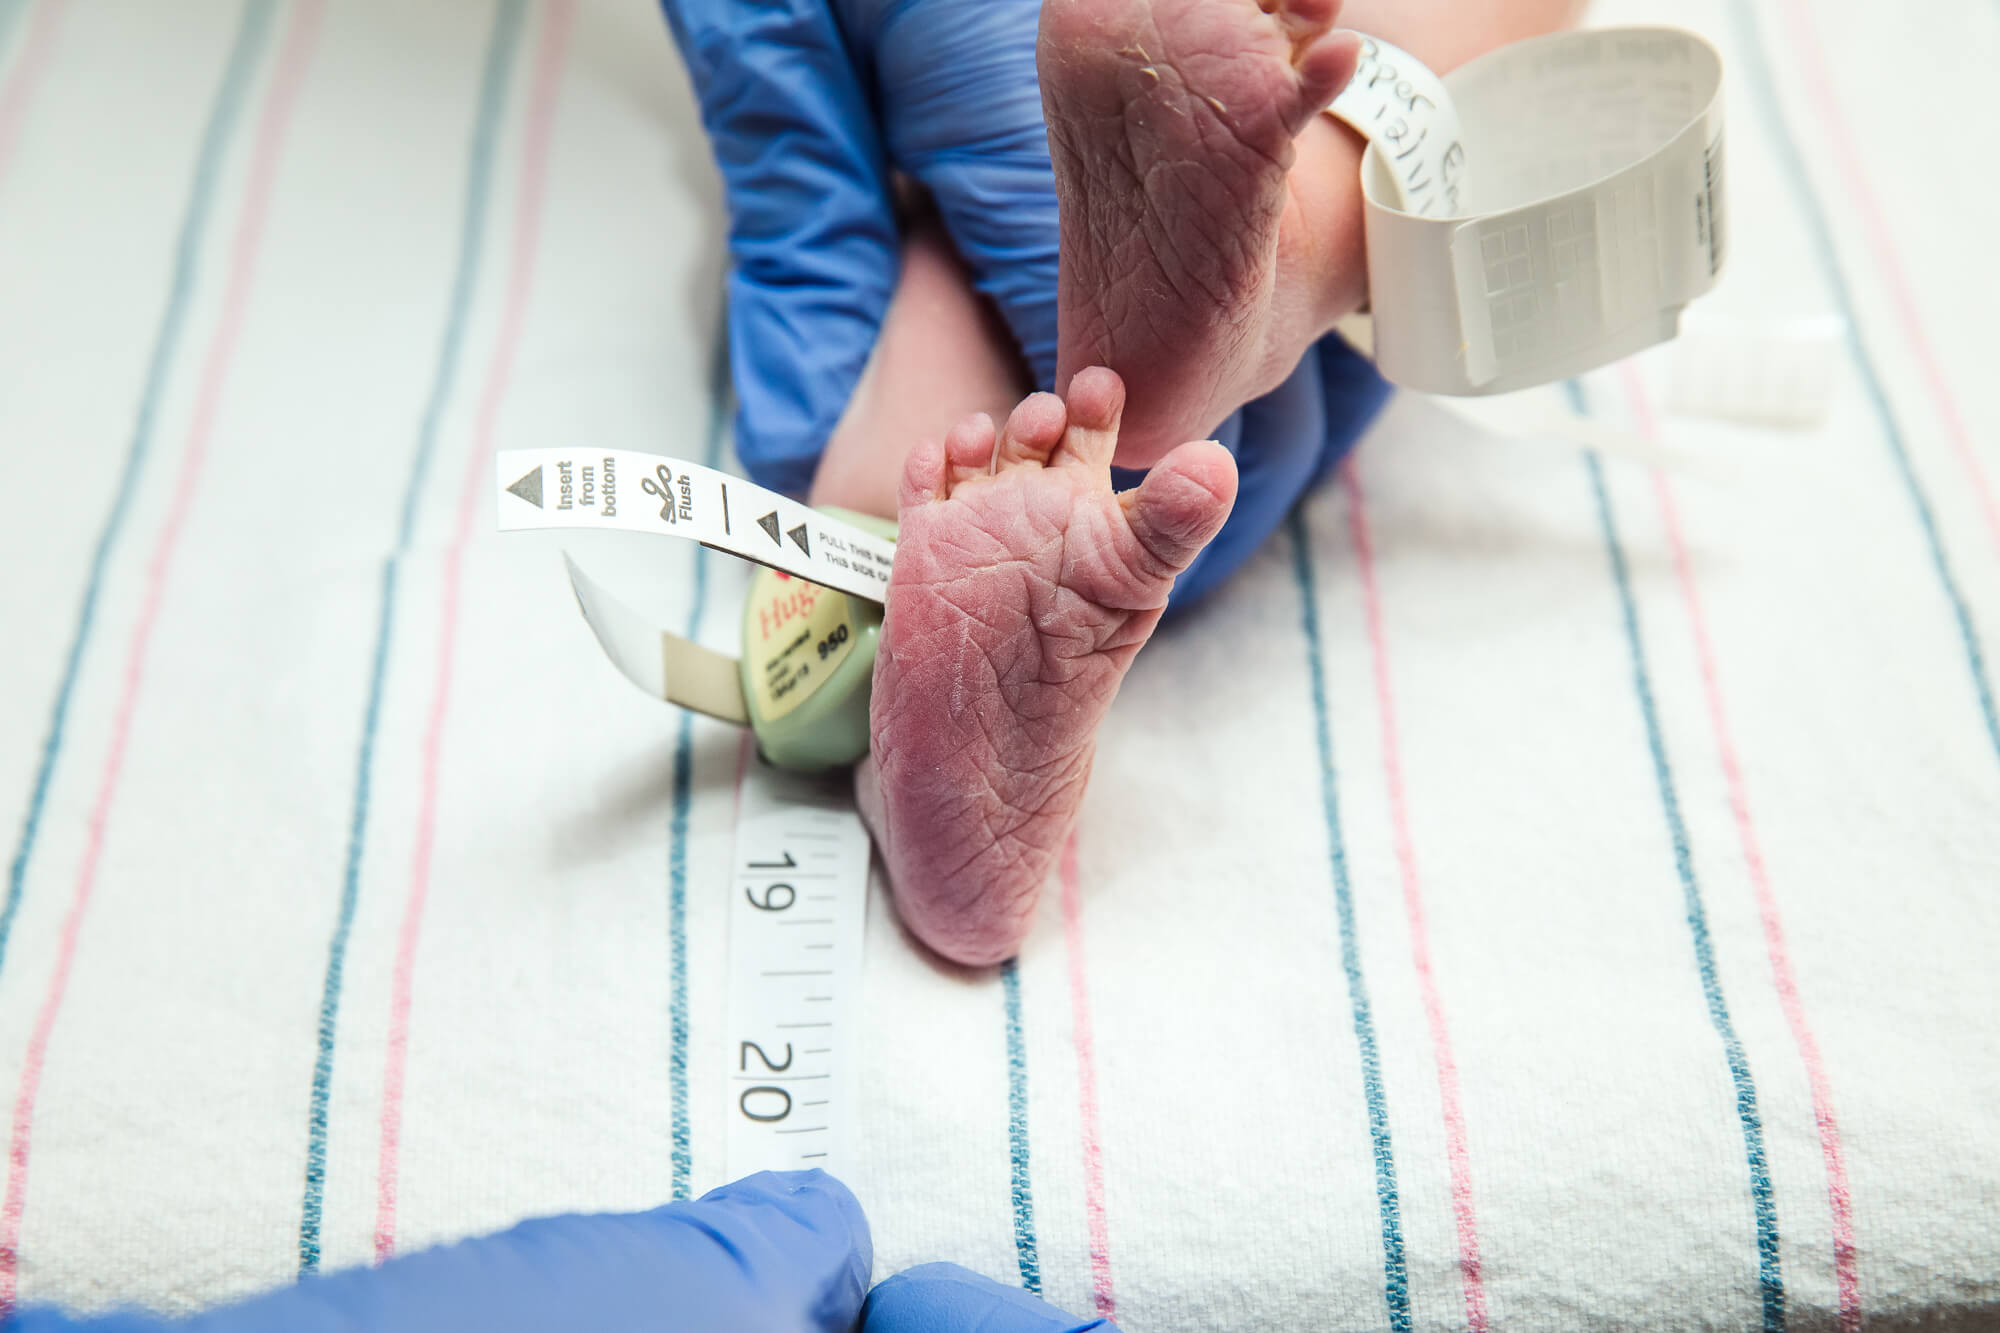 Newborn baby's toes splayed as its legs are held by two blue-gloved hands on a hospital baby blanket, an ID tag on the baby's left ankle